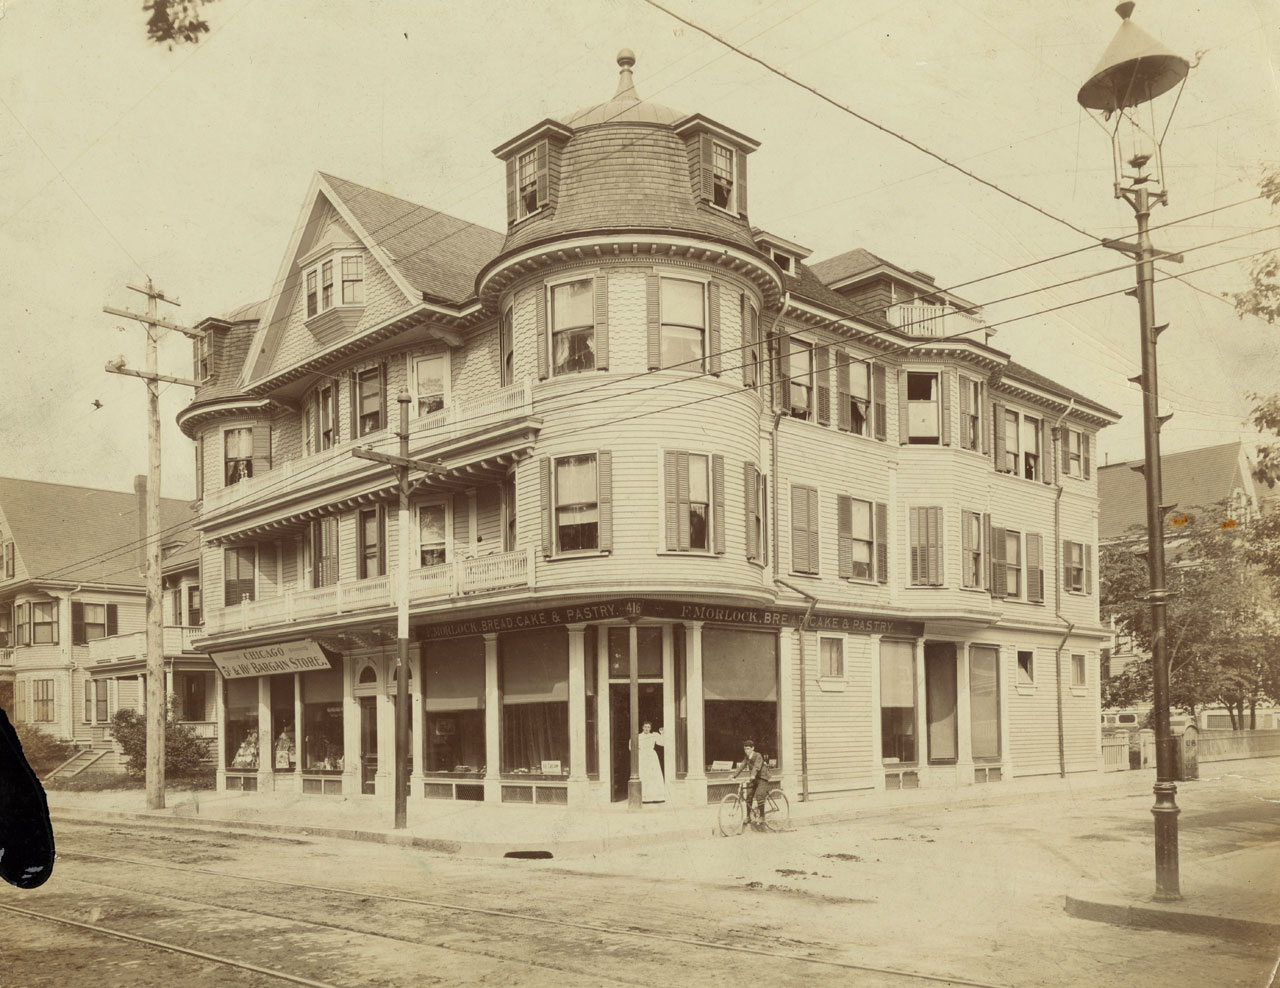   Frederick Morlock (1850-1906), born in Germany and naturalized in 1881, owned the large building at 416 Centre Street and the smaller house next to it at 408 Centre Street. He owned and operated the bakery in the corner store pictured here where El